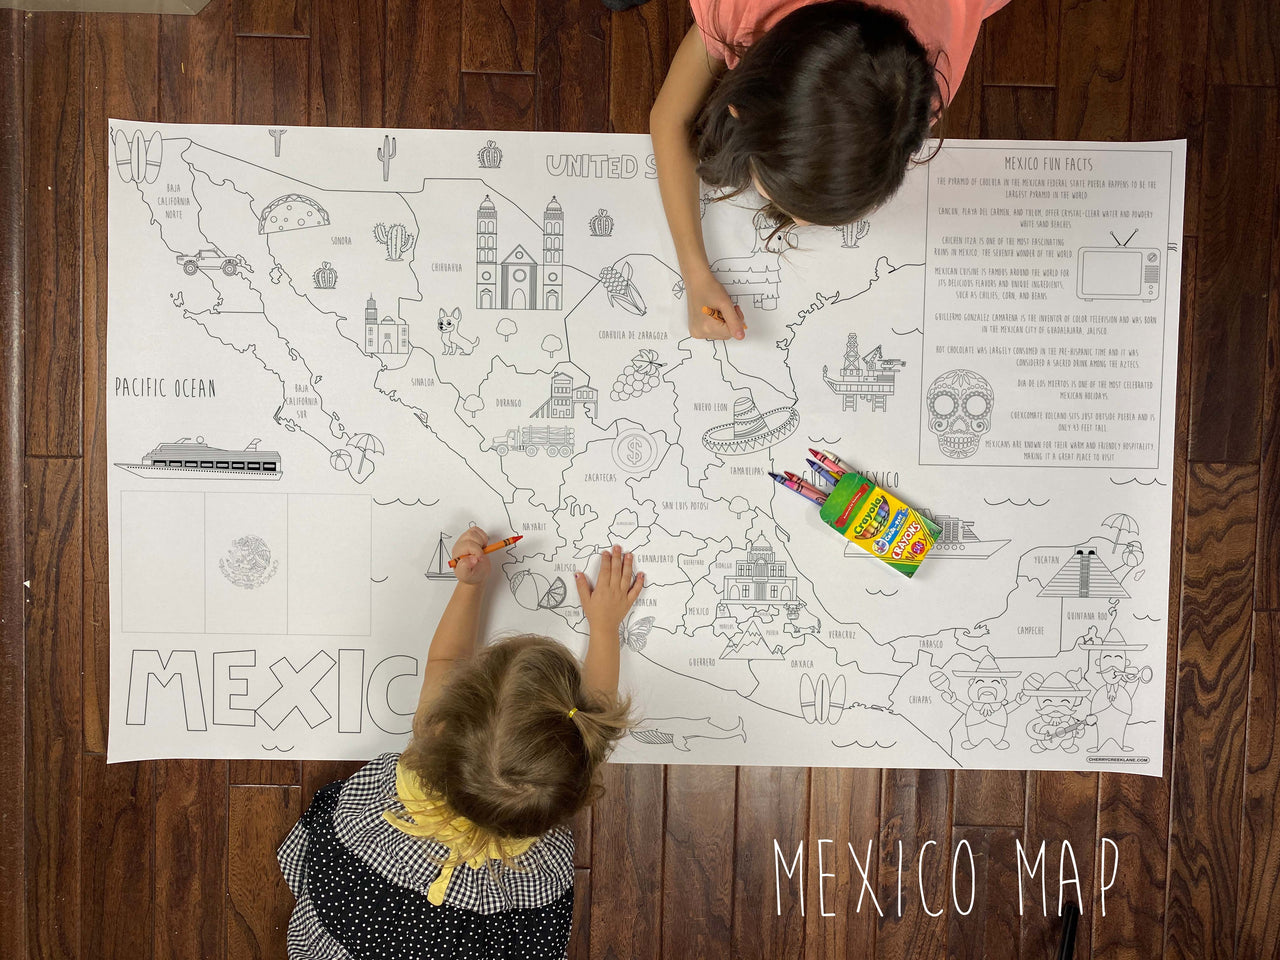 Once Upon A Time Giant Coloring Poster